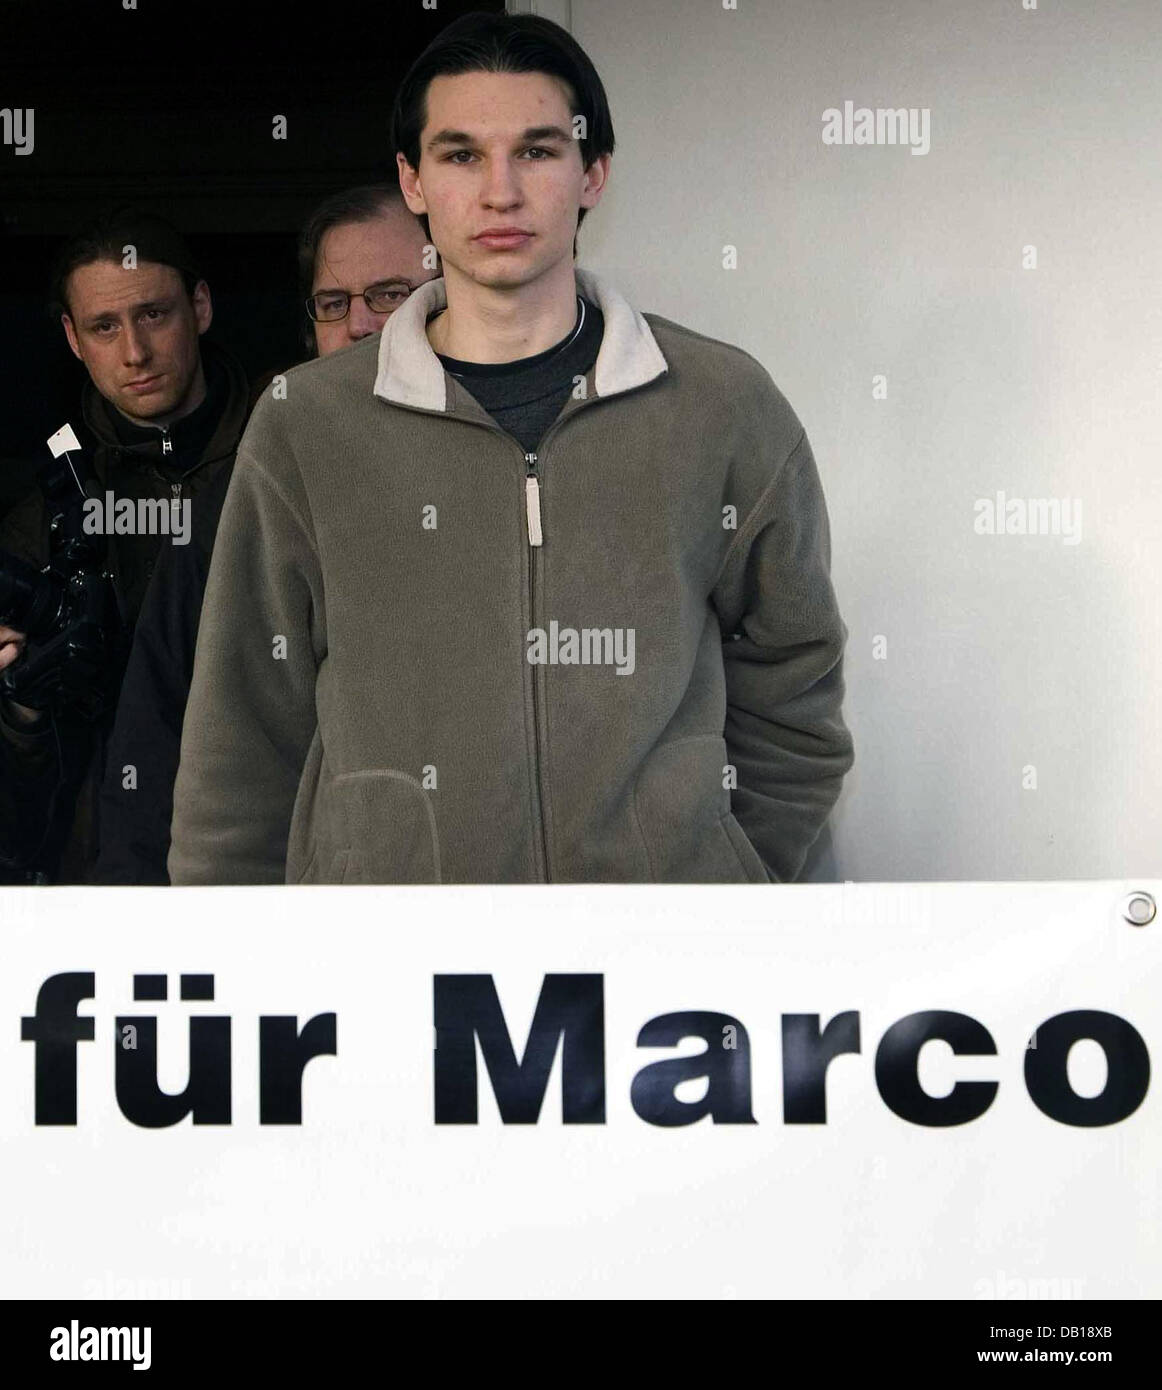 Sascha W. (R), brother of 17-year-old Marco W., poses with a placard after a press conference in Uelzen, Germany, 20 November 2007. Marco W. will remain in Turkish remand until 14 December at the least, only then the proceedings will be continued. Marco's condition is described as stable, but his attourneys fear a skin disease might perilously worsen under the present conditions of Stock Photo